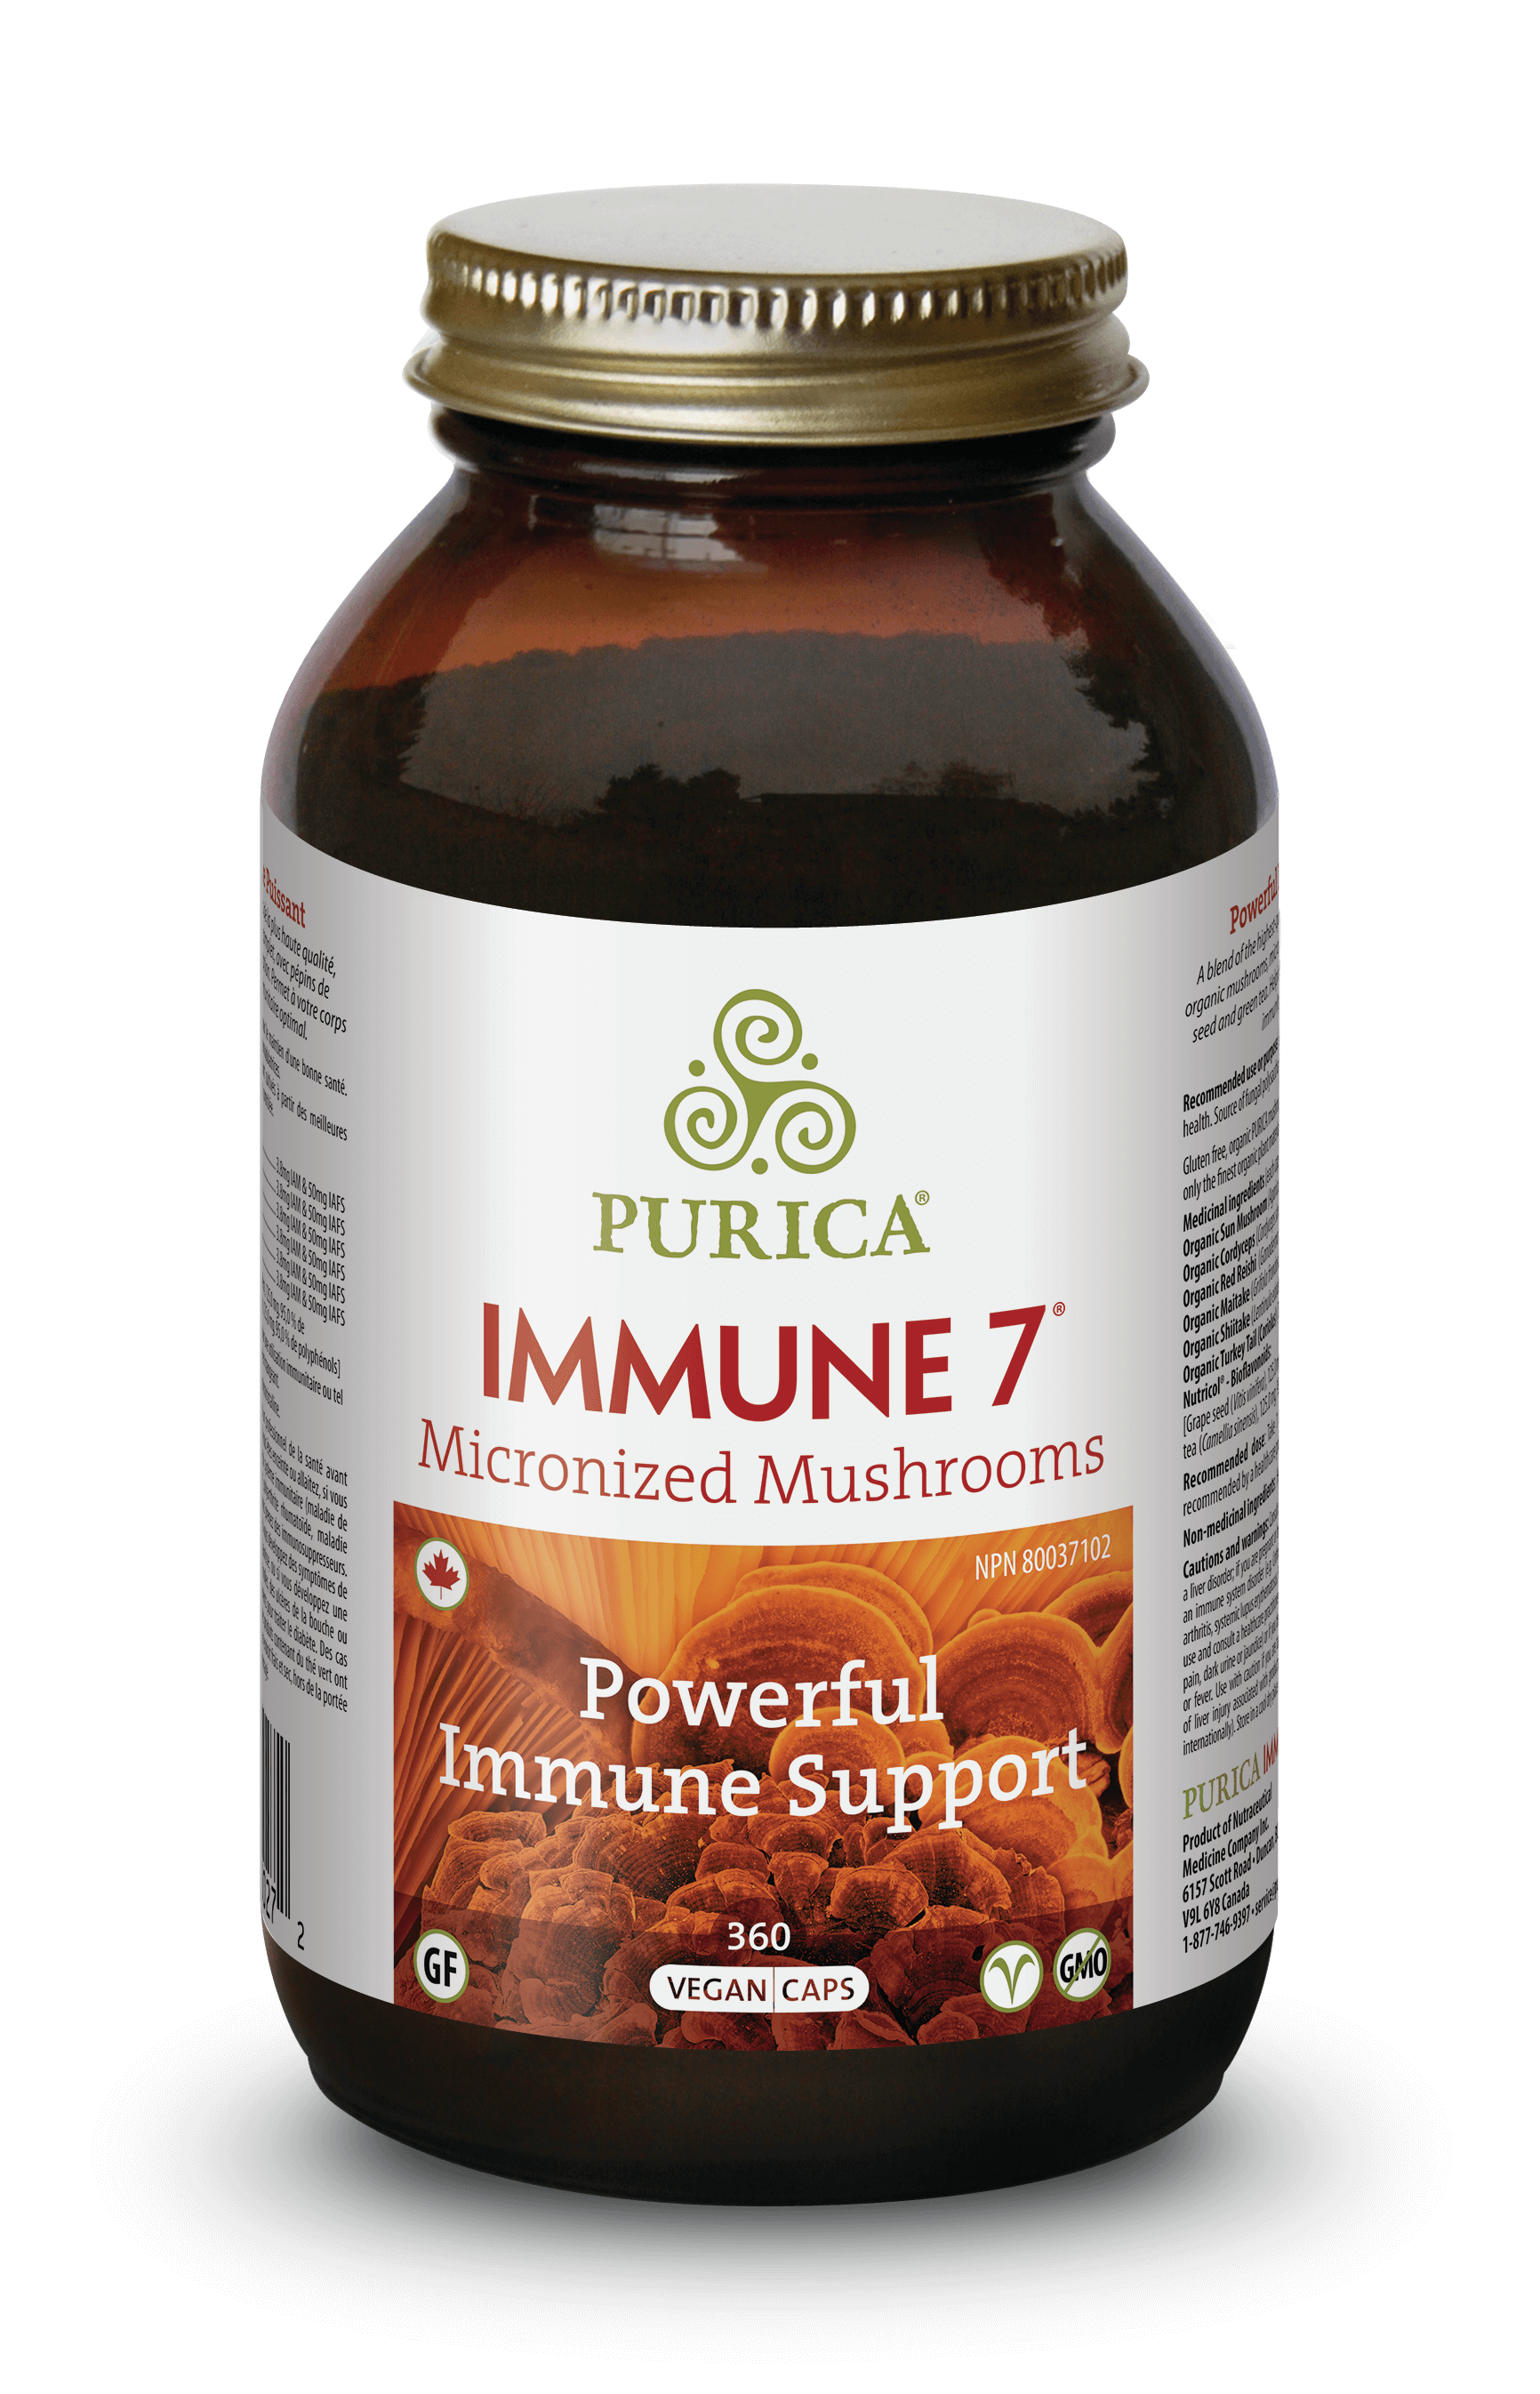 Purica Immune 7 (360 VCaps) - Lifestyle Markets